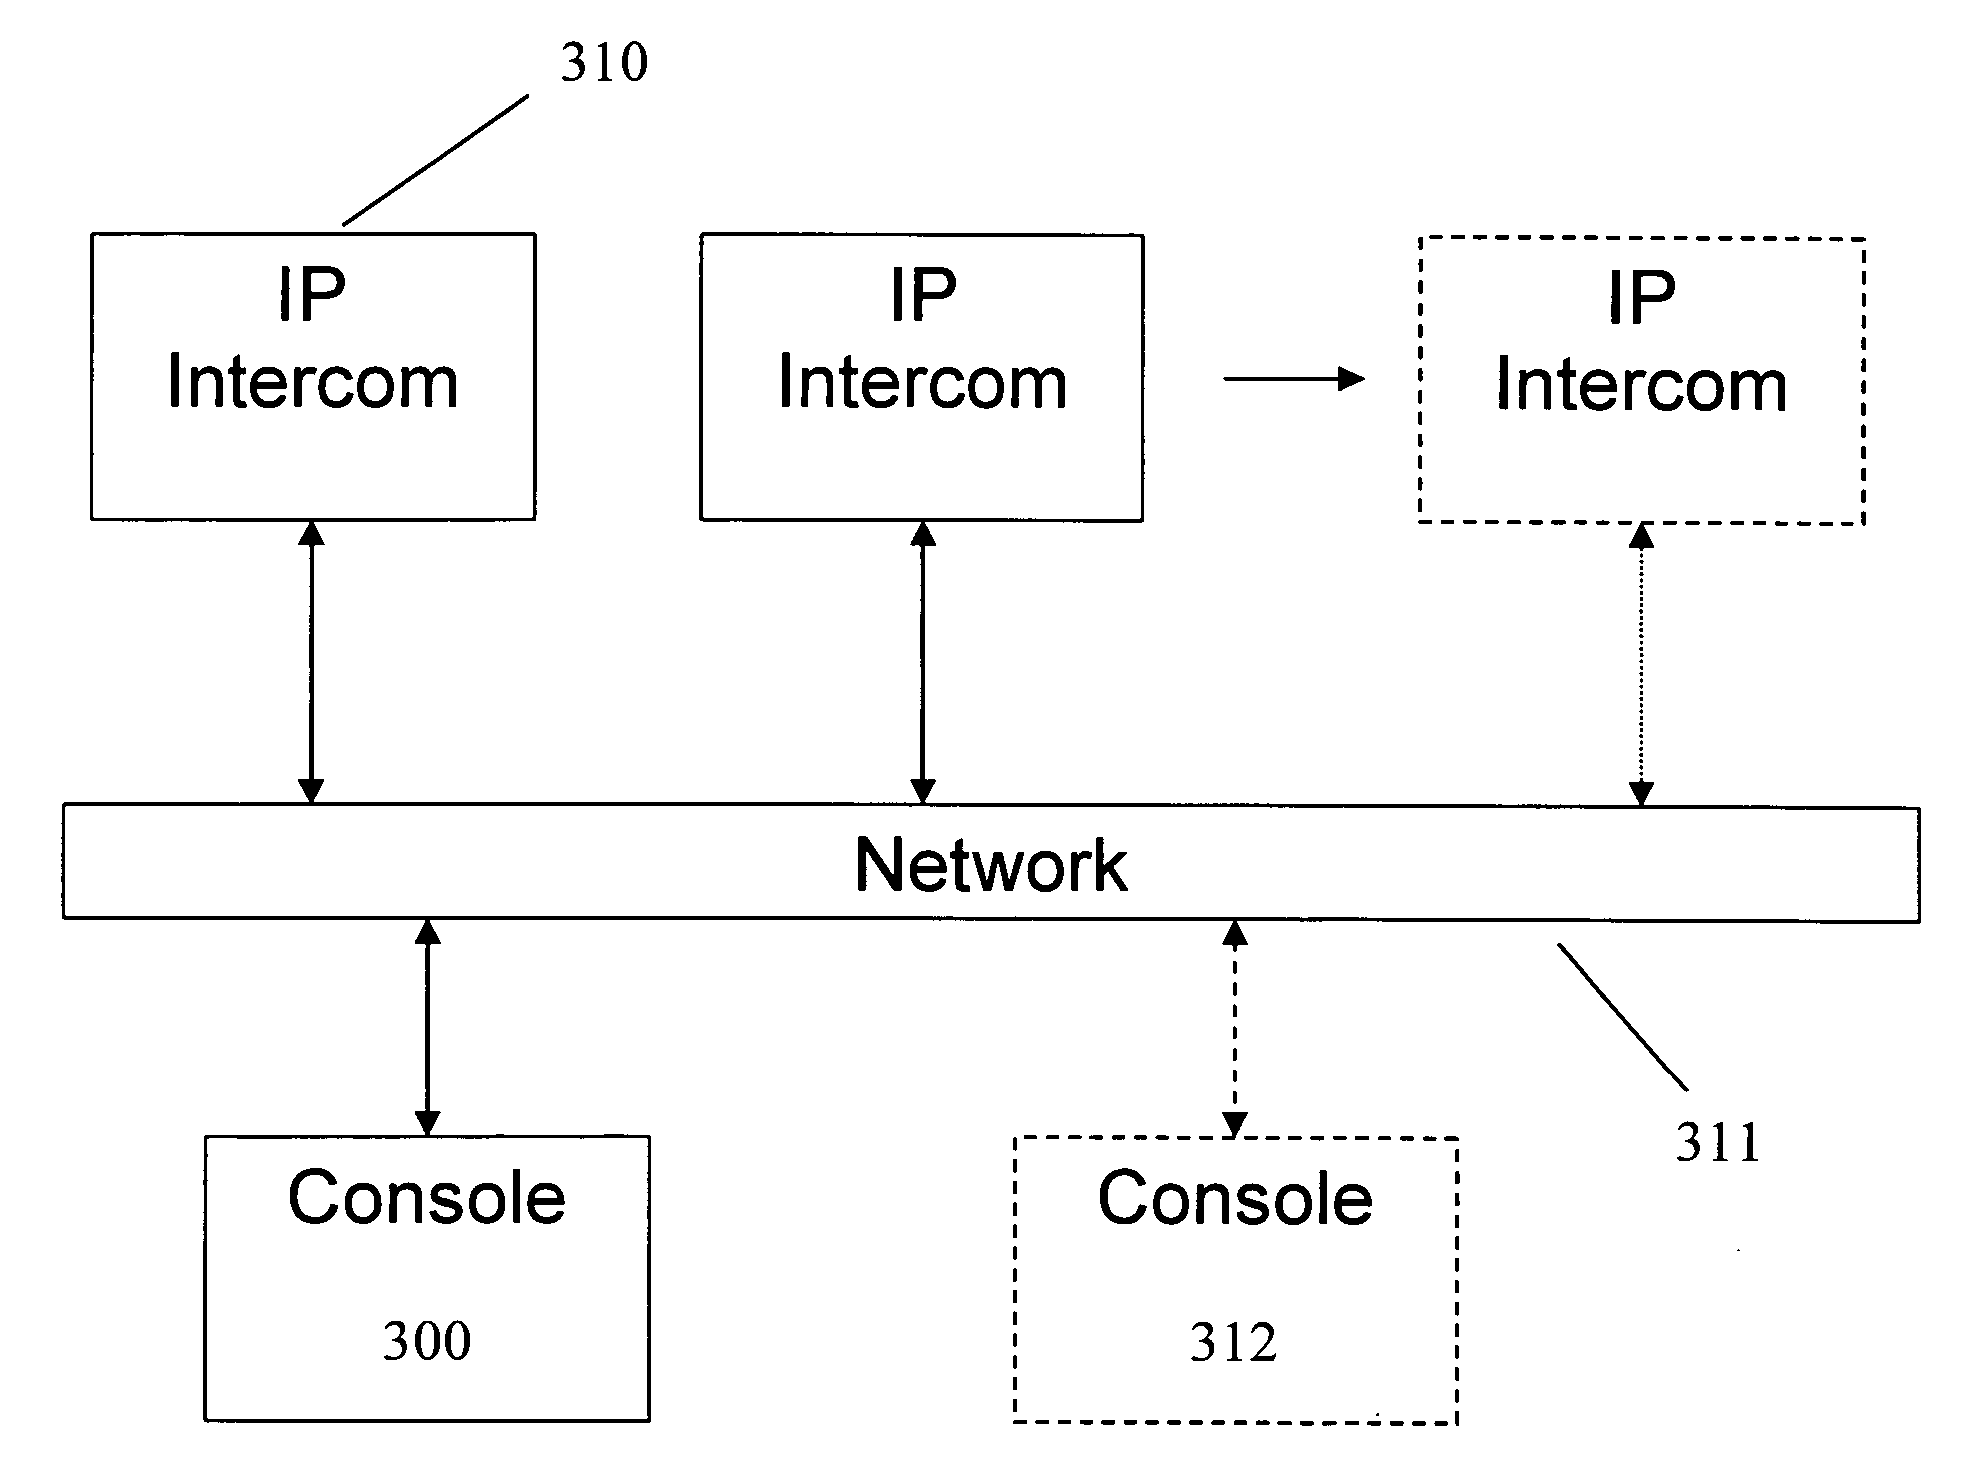 Method and system for computer based intercom control and management